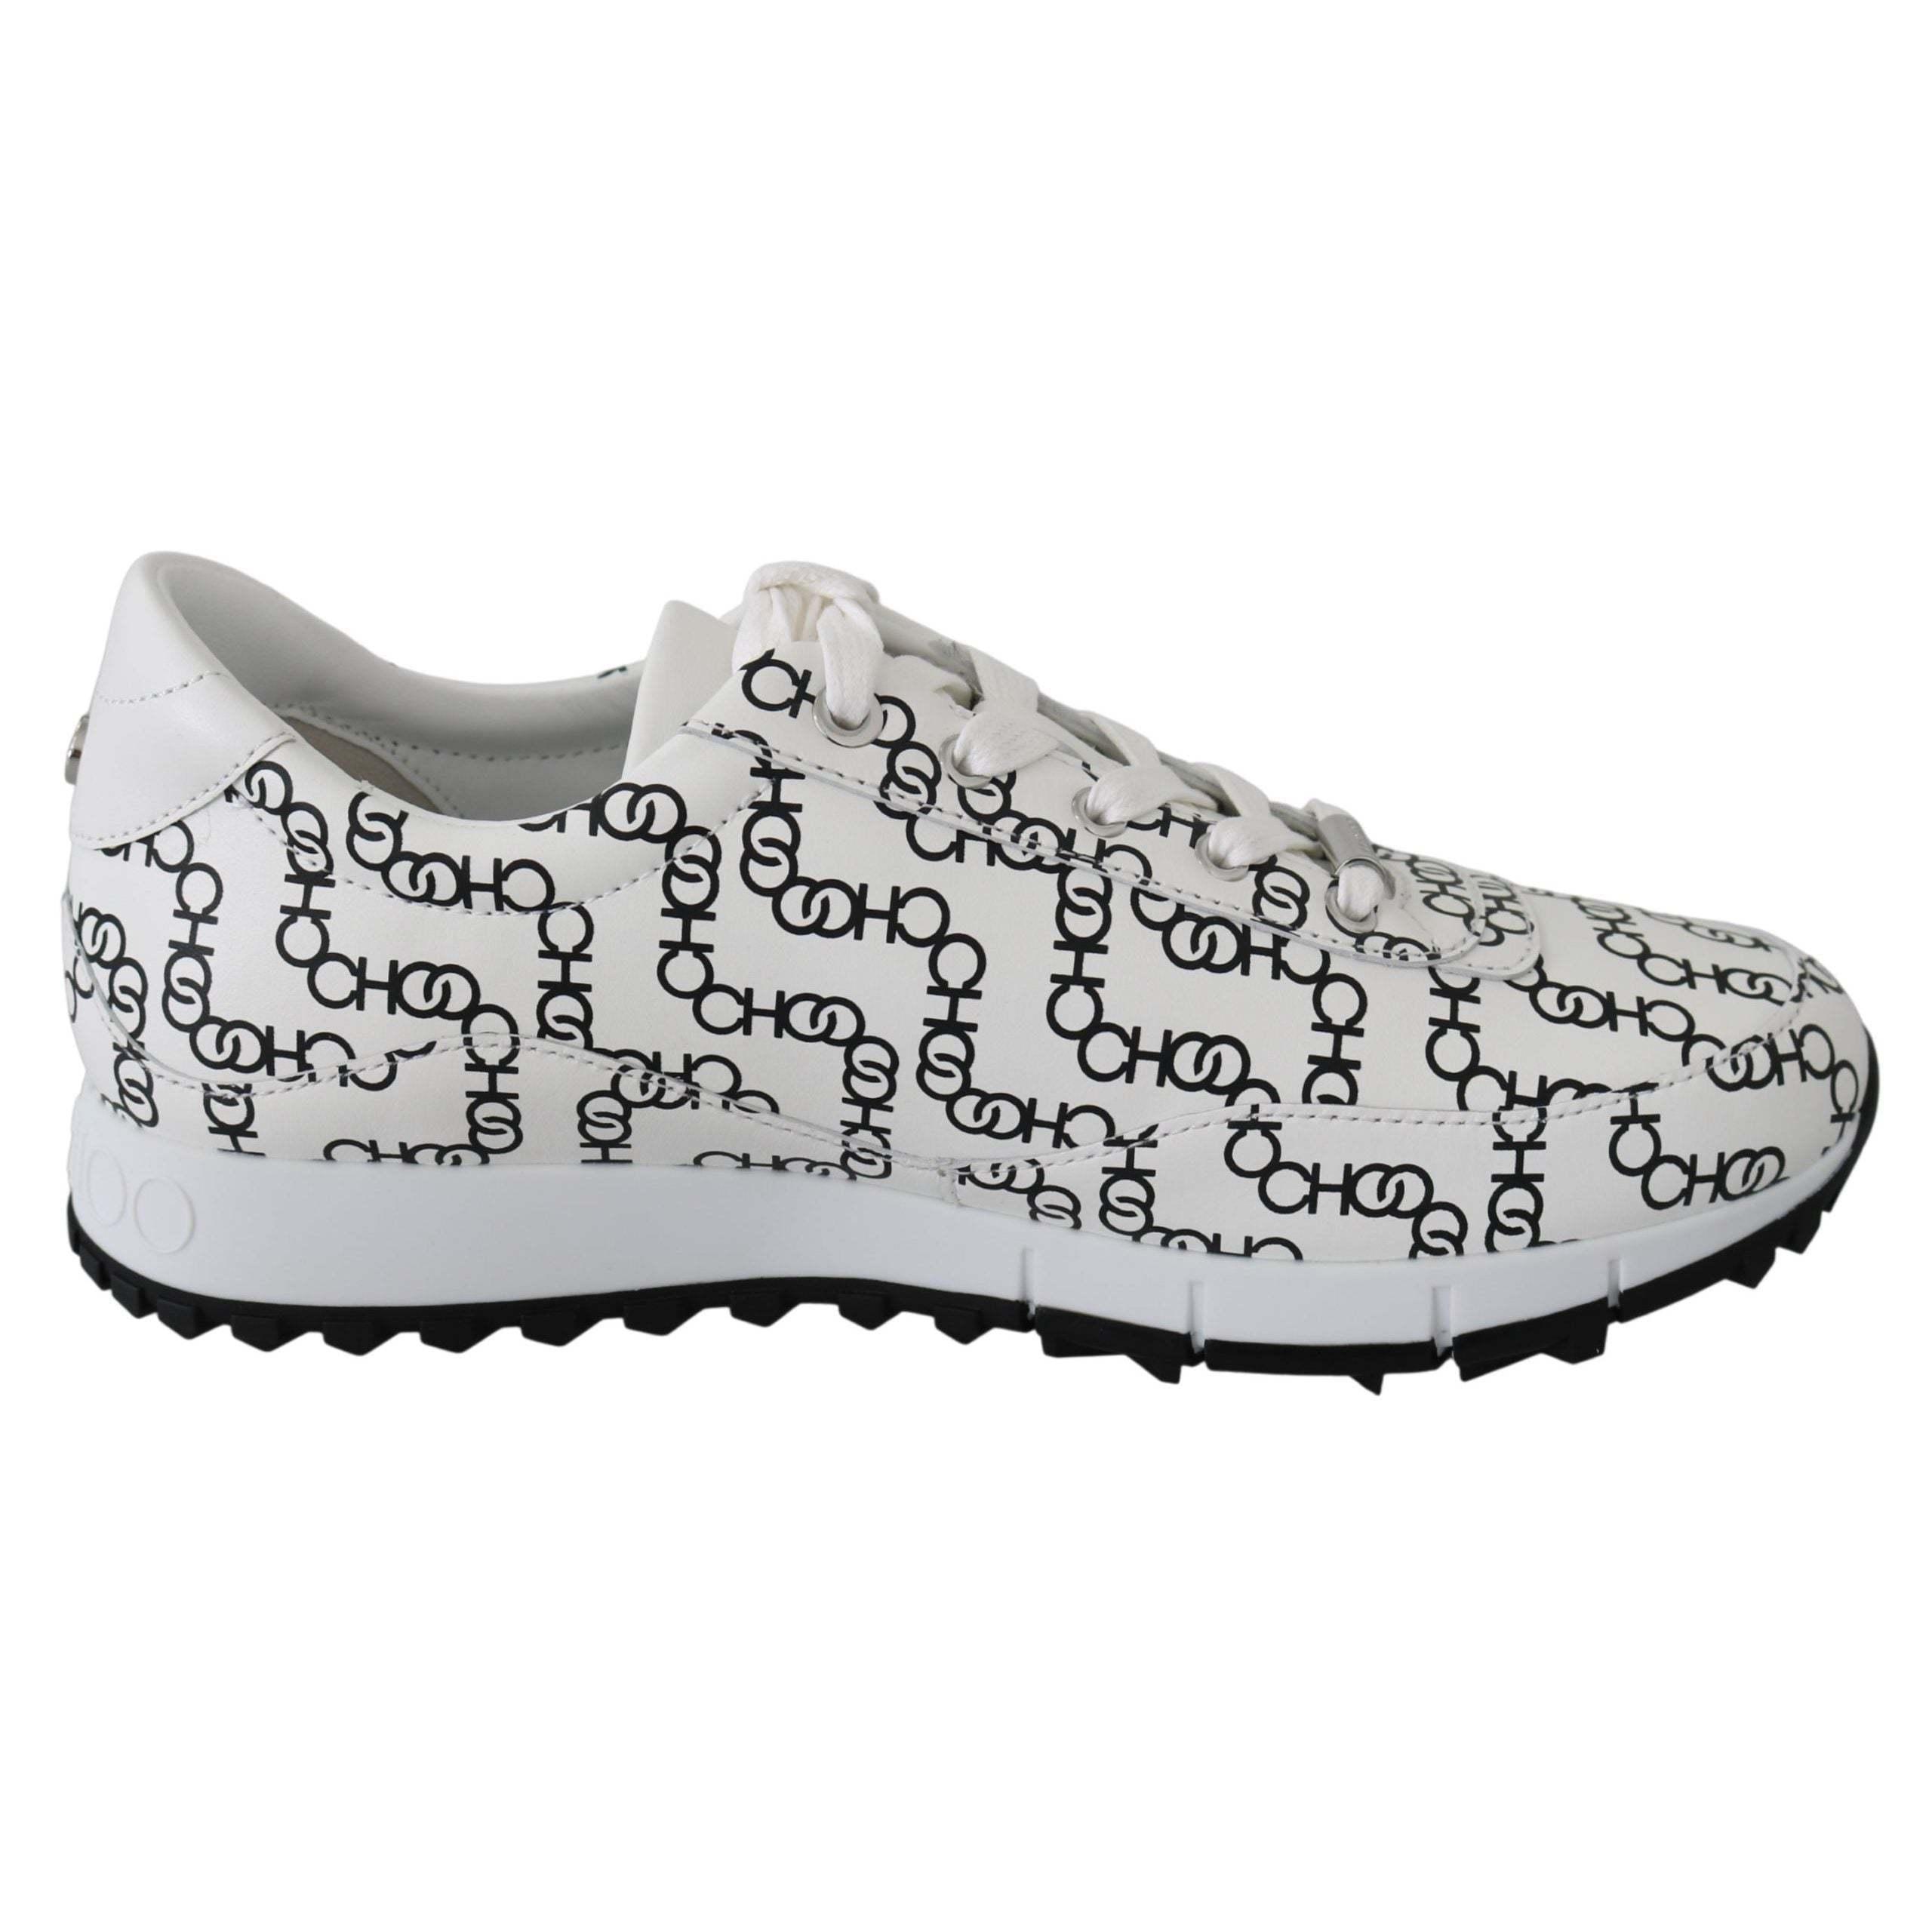 Monza White/black Leather Sneakers